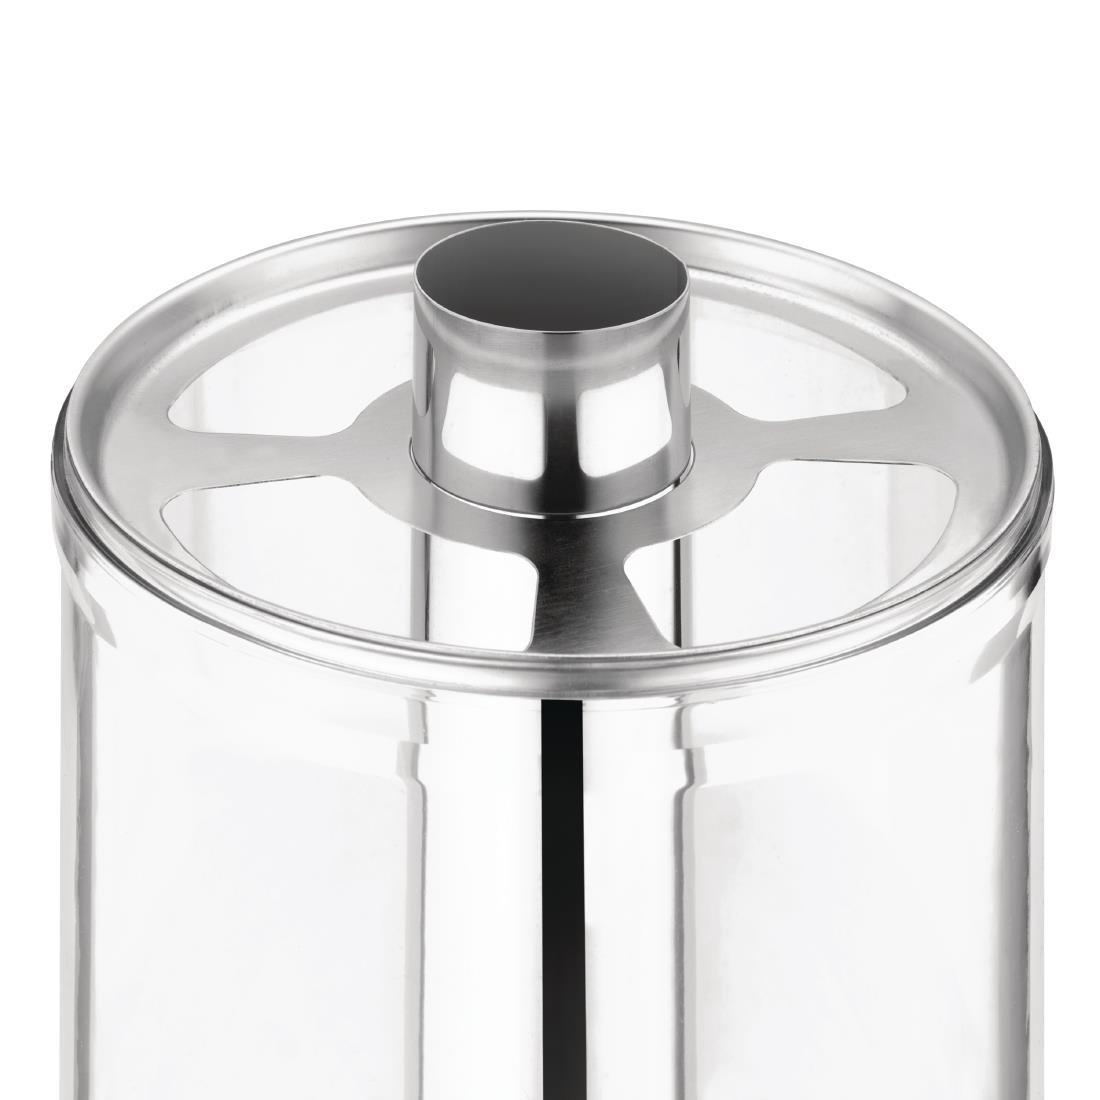 Olympia Double Juice Dispenser with Drip Tray - J184  - 5